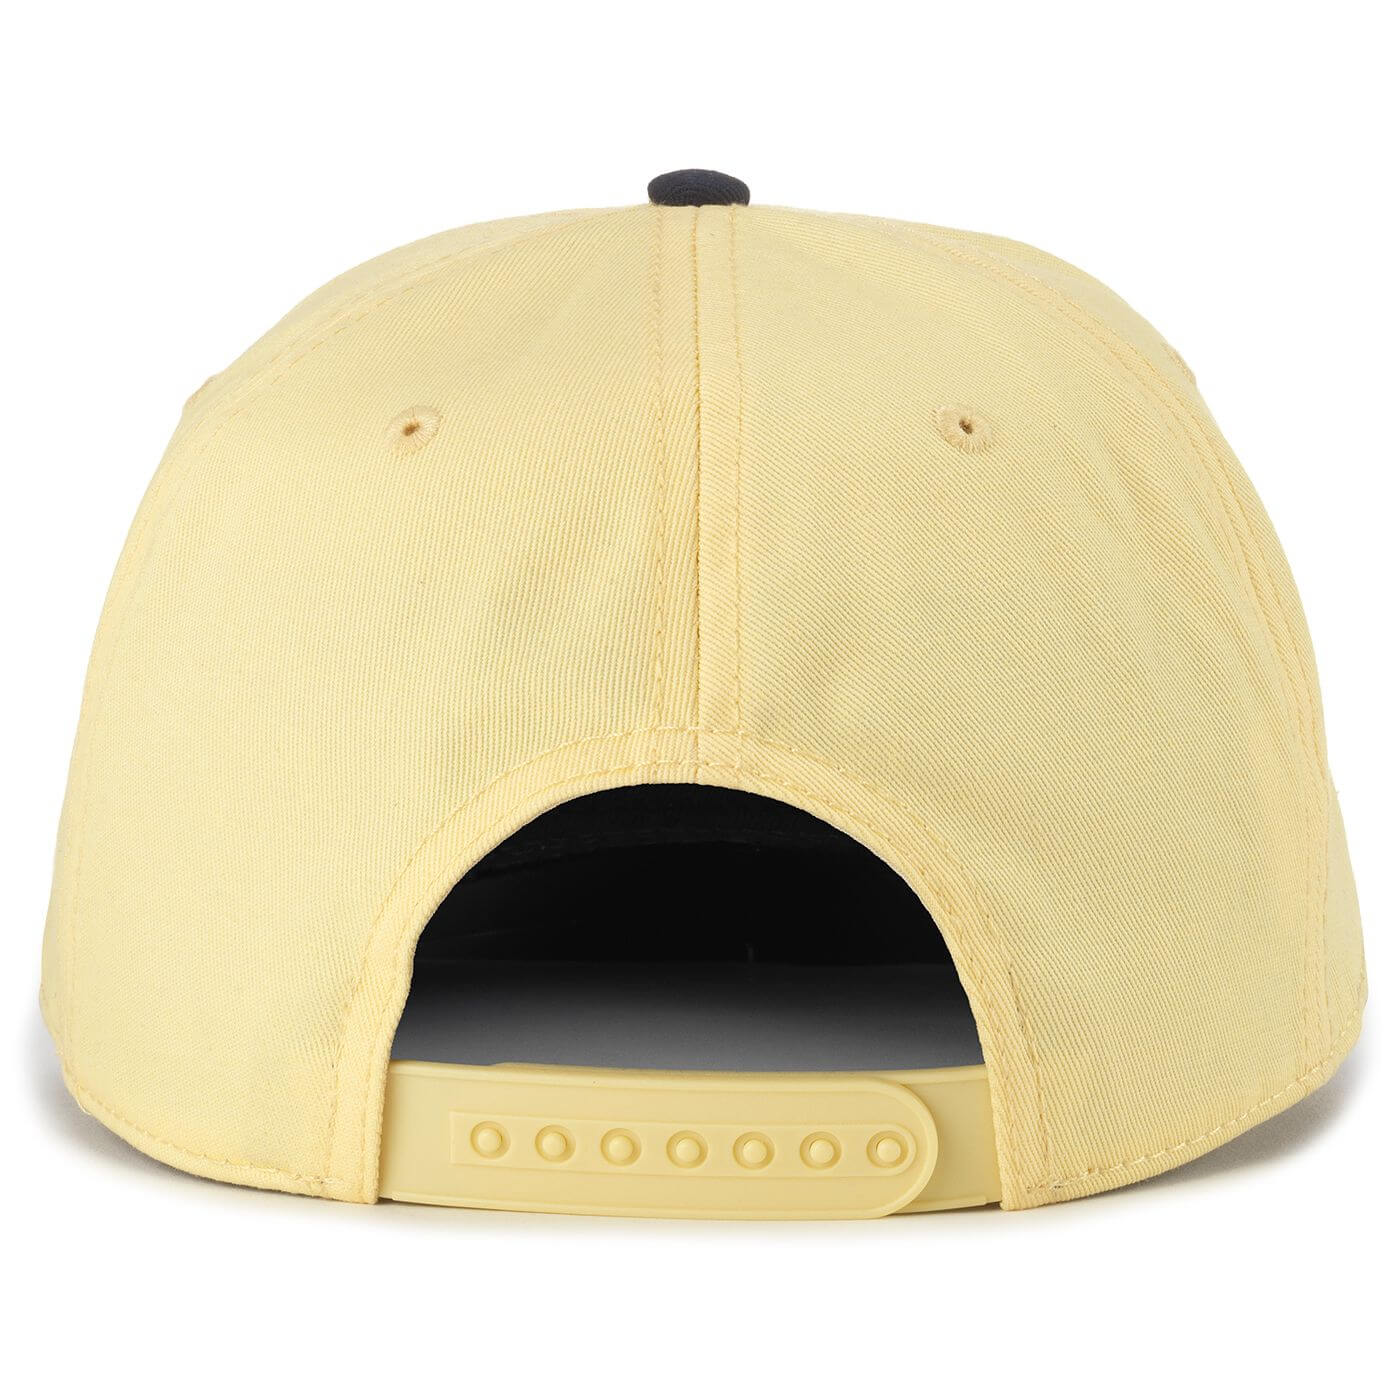 Coors Banquet Hats: Yellow/Navy Snapback Rope Hat | Official License 2